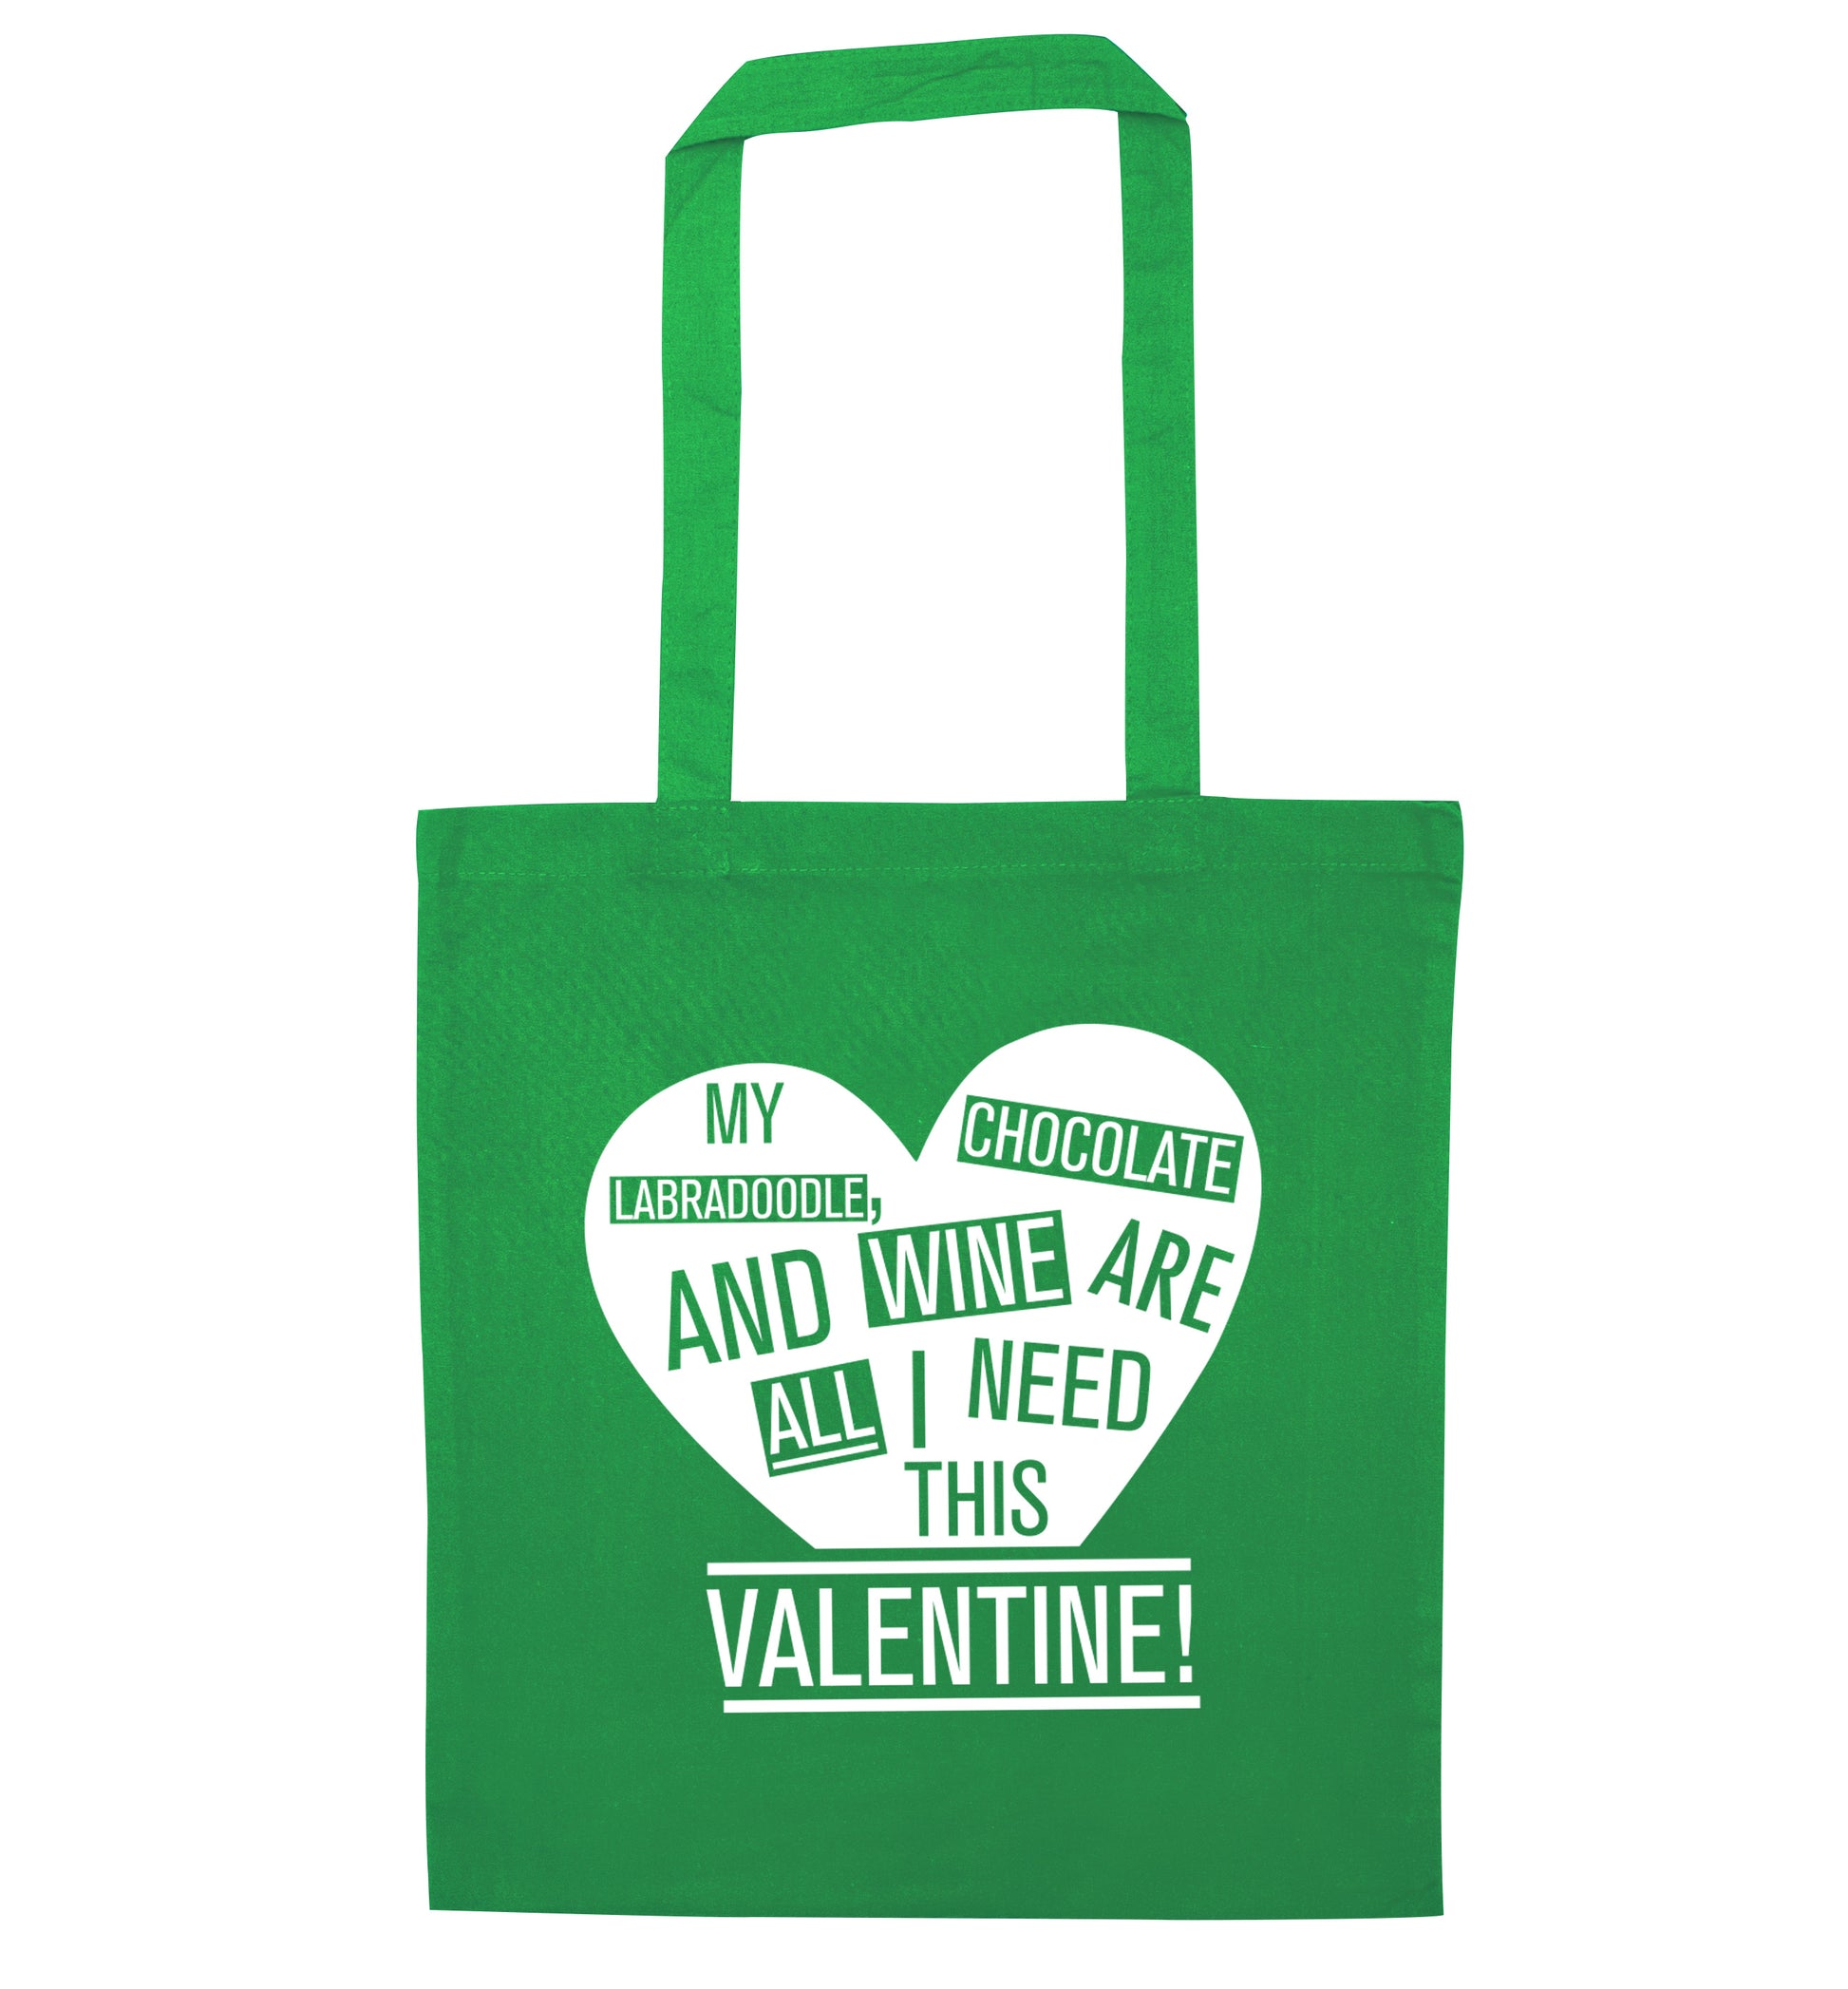 My labradoodle, chocolate and wine are all I need this valentine! green tote bag